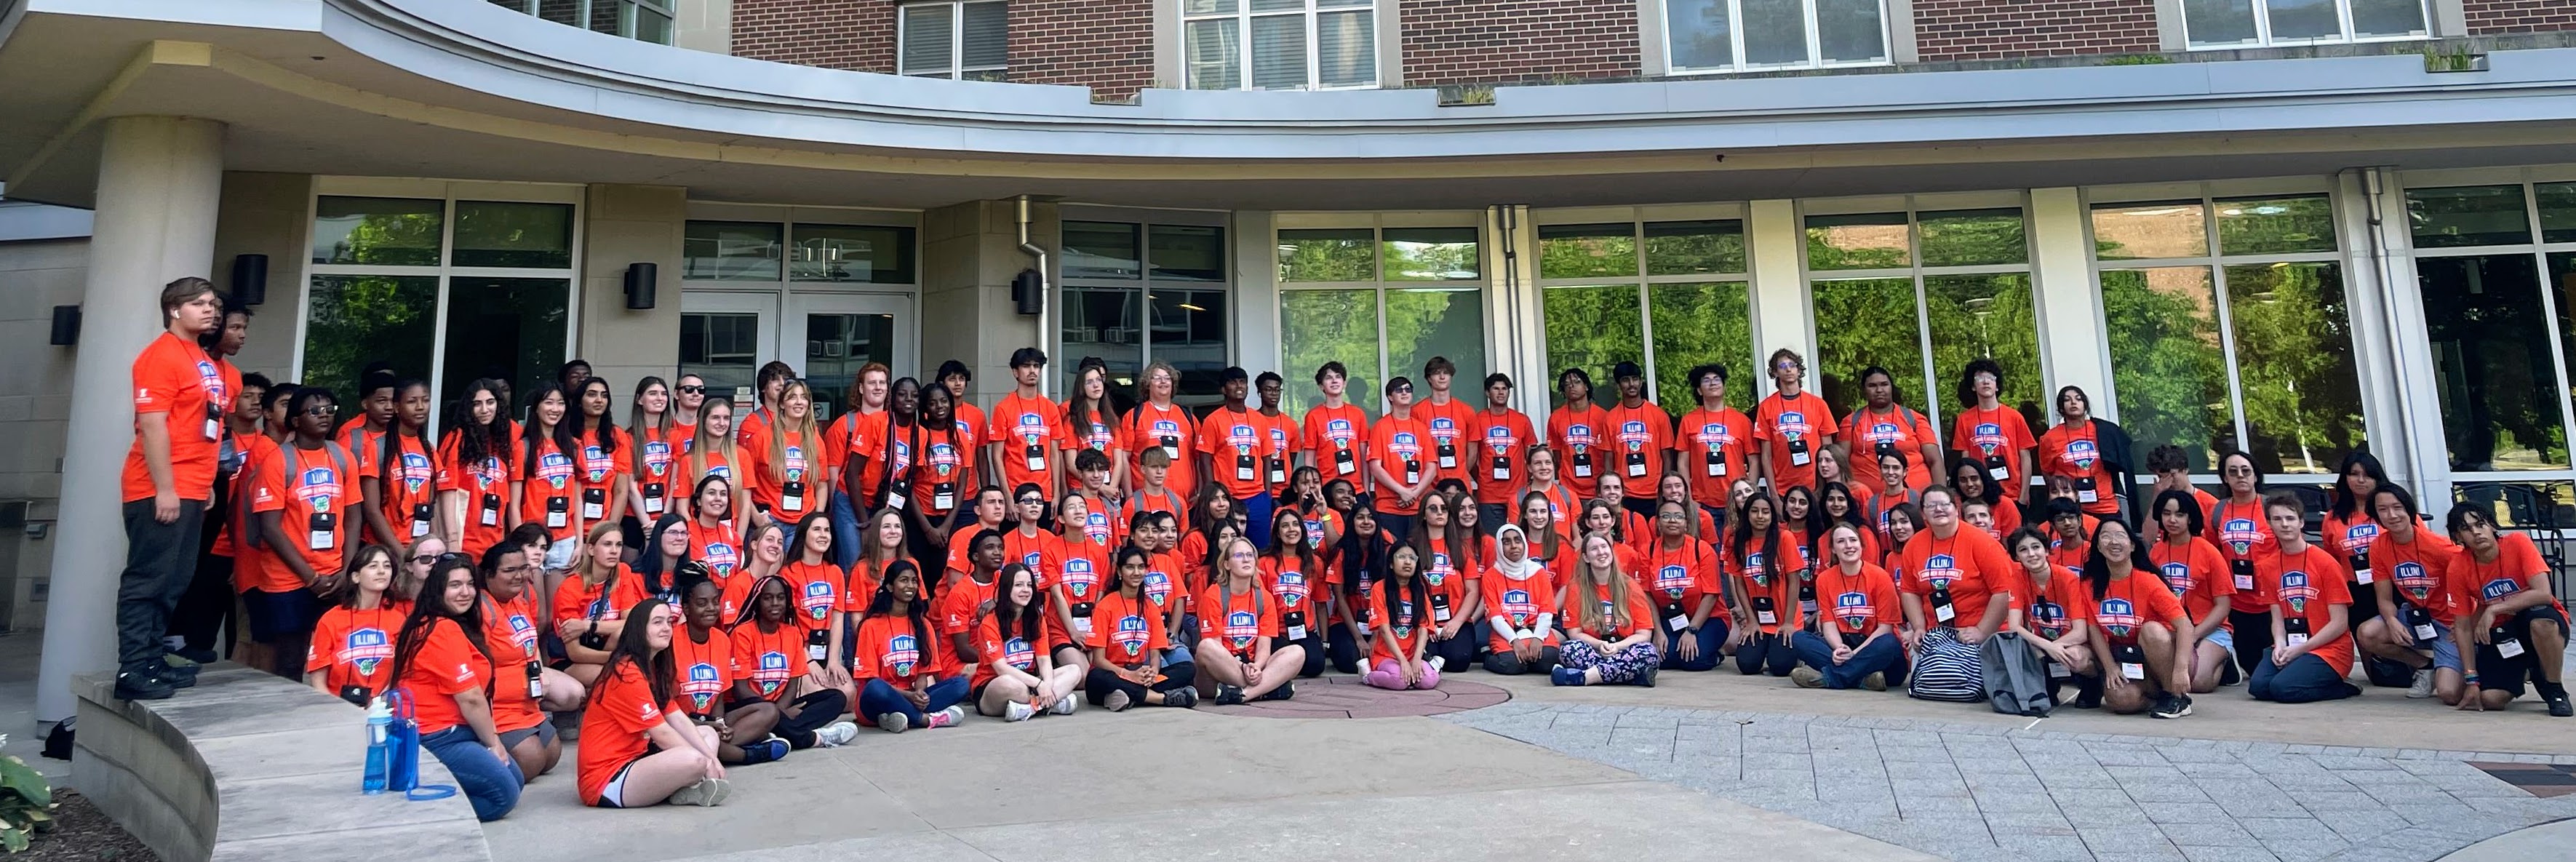 A group photo of high school student participants in Illinois 4H's Illinois Summer Academies program wearing matching orange shirts.